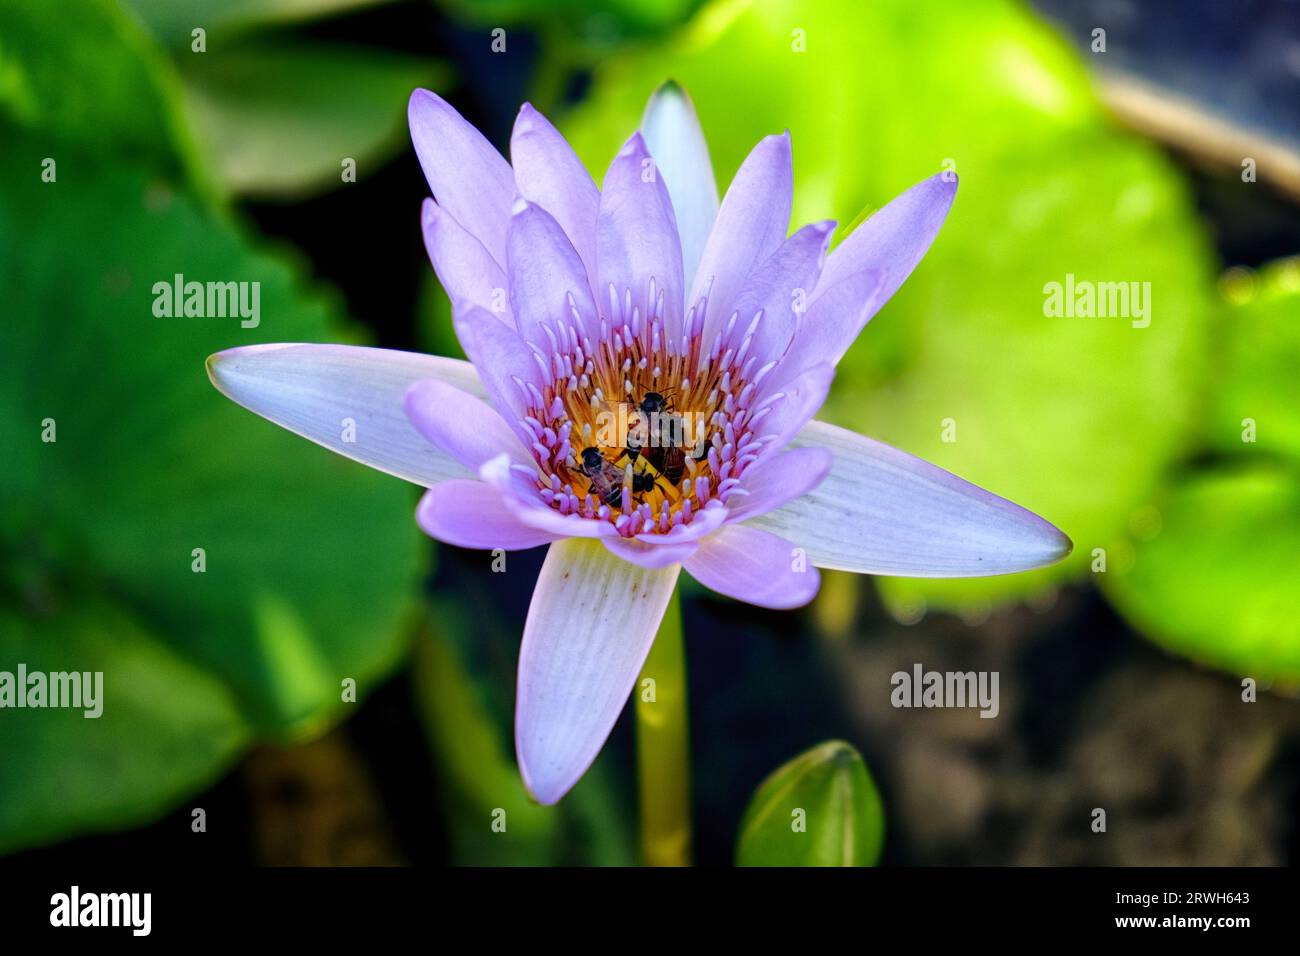 A purple water lily in full bloom with a insects collecting pollen, surrounded by green leaves and stems. Stock Photo